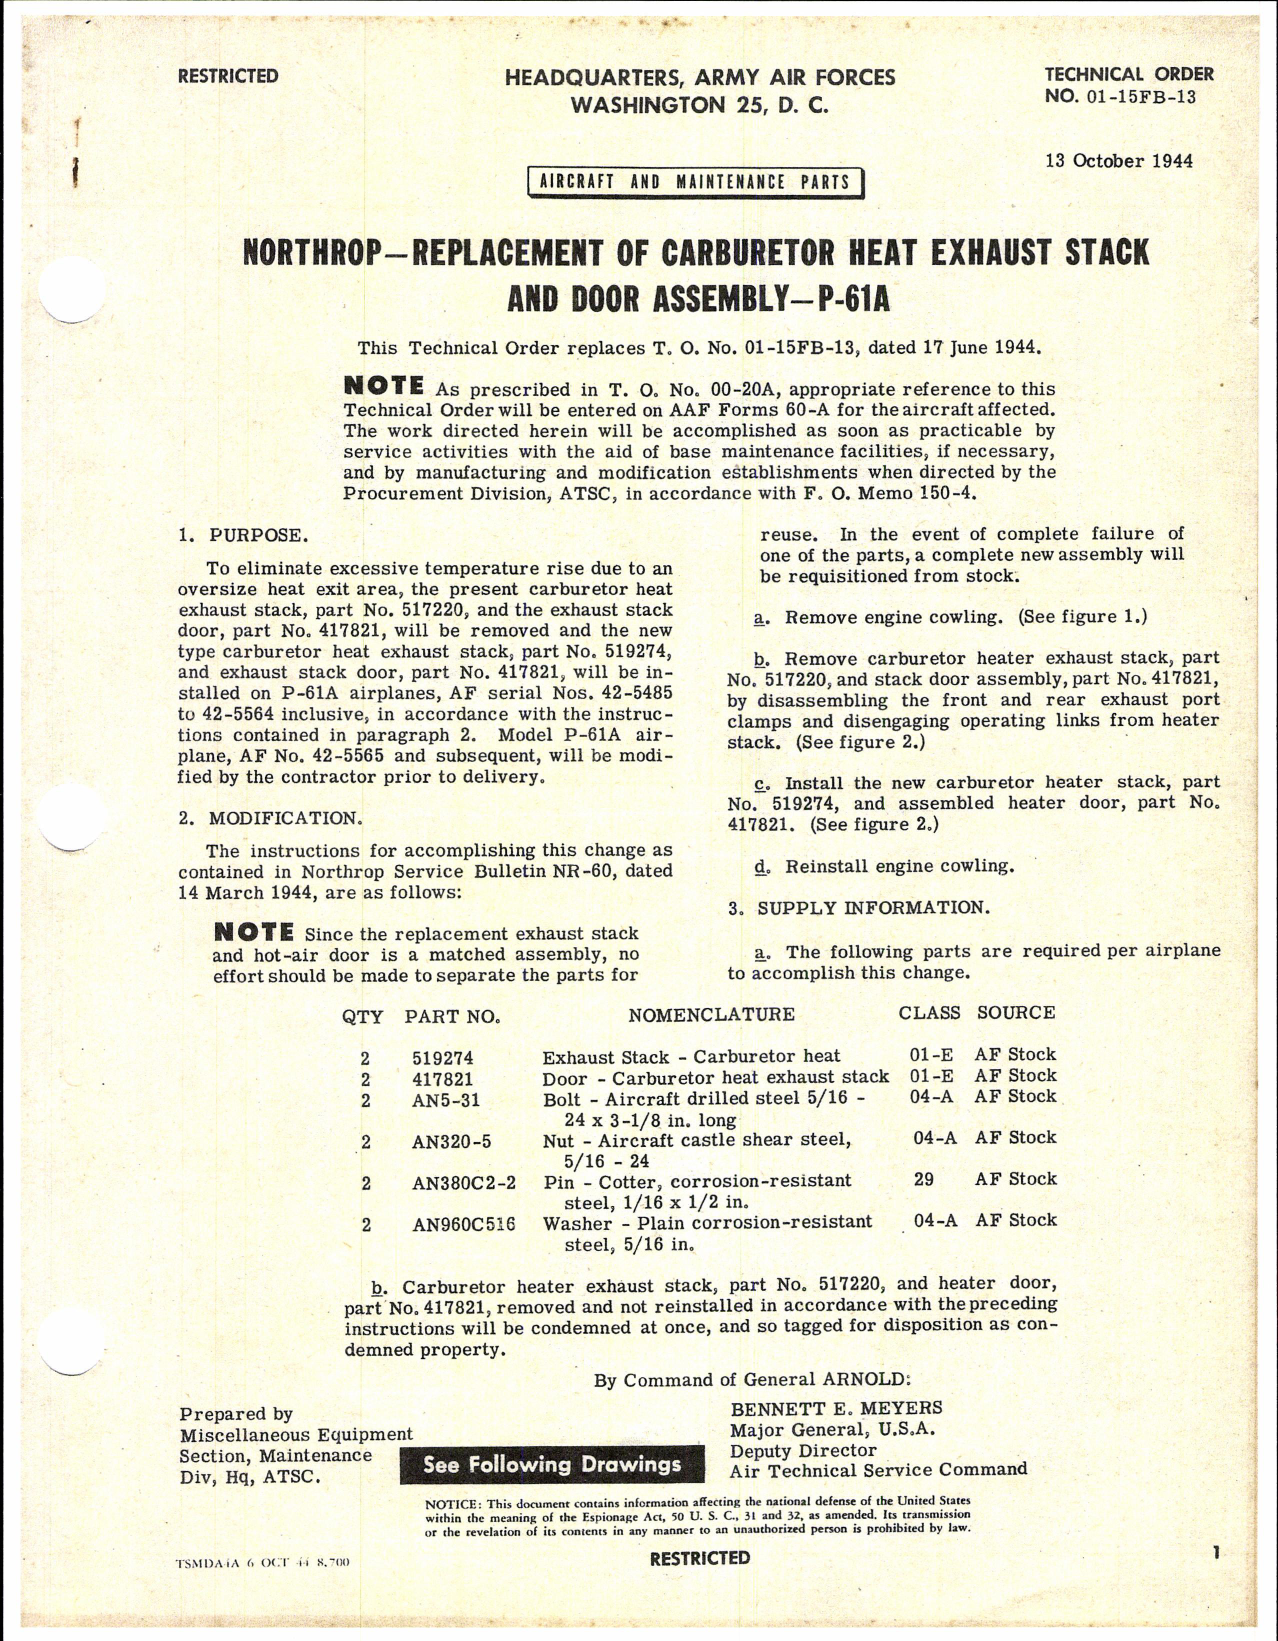 Sample page 1 from AirCorps Library document: Replacement of Carburetor Heat Exhaust Stack and Door Assembly for P-61A